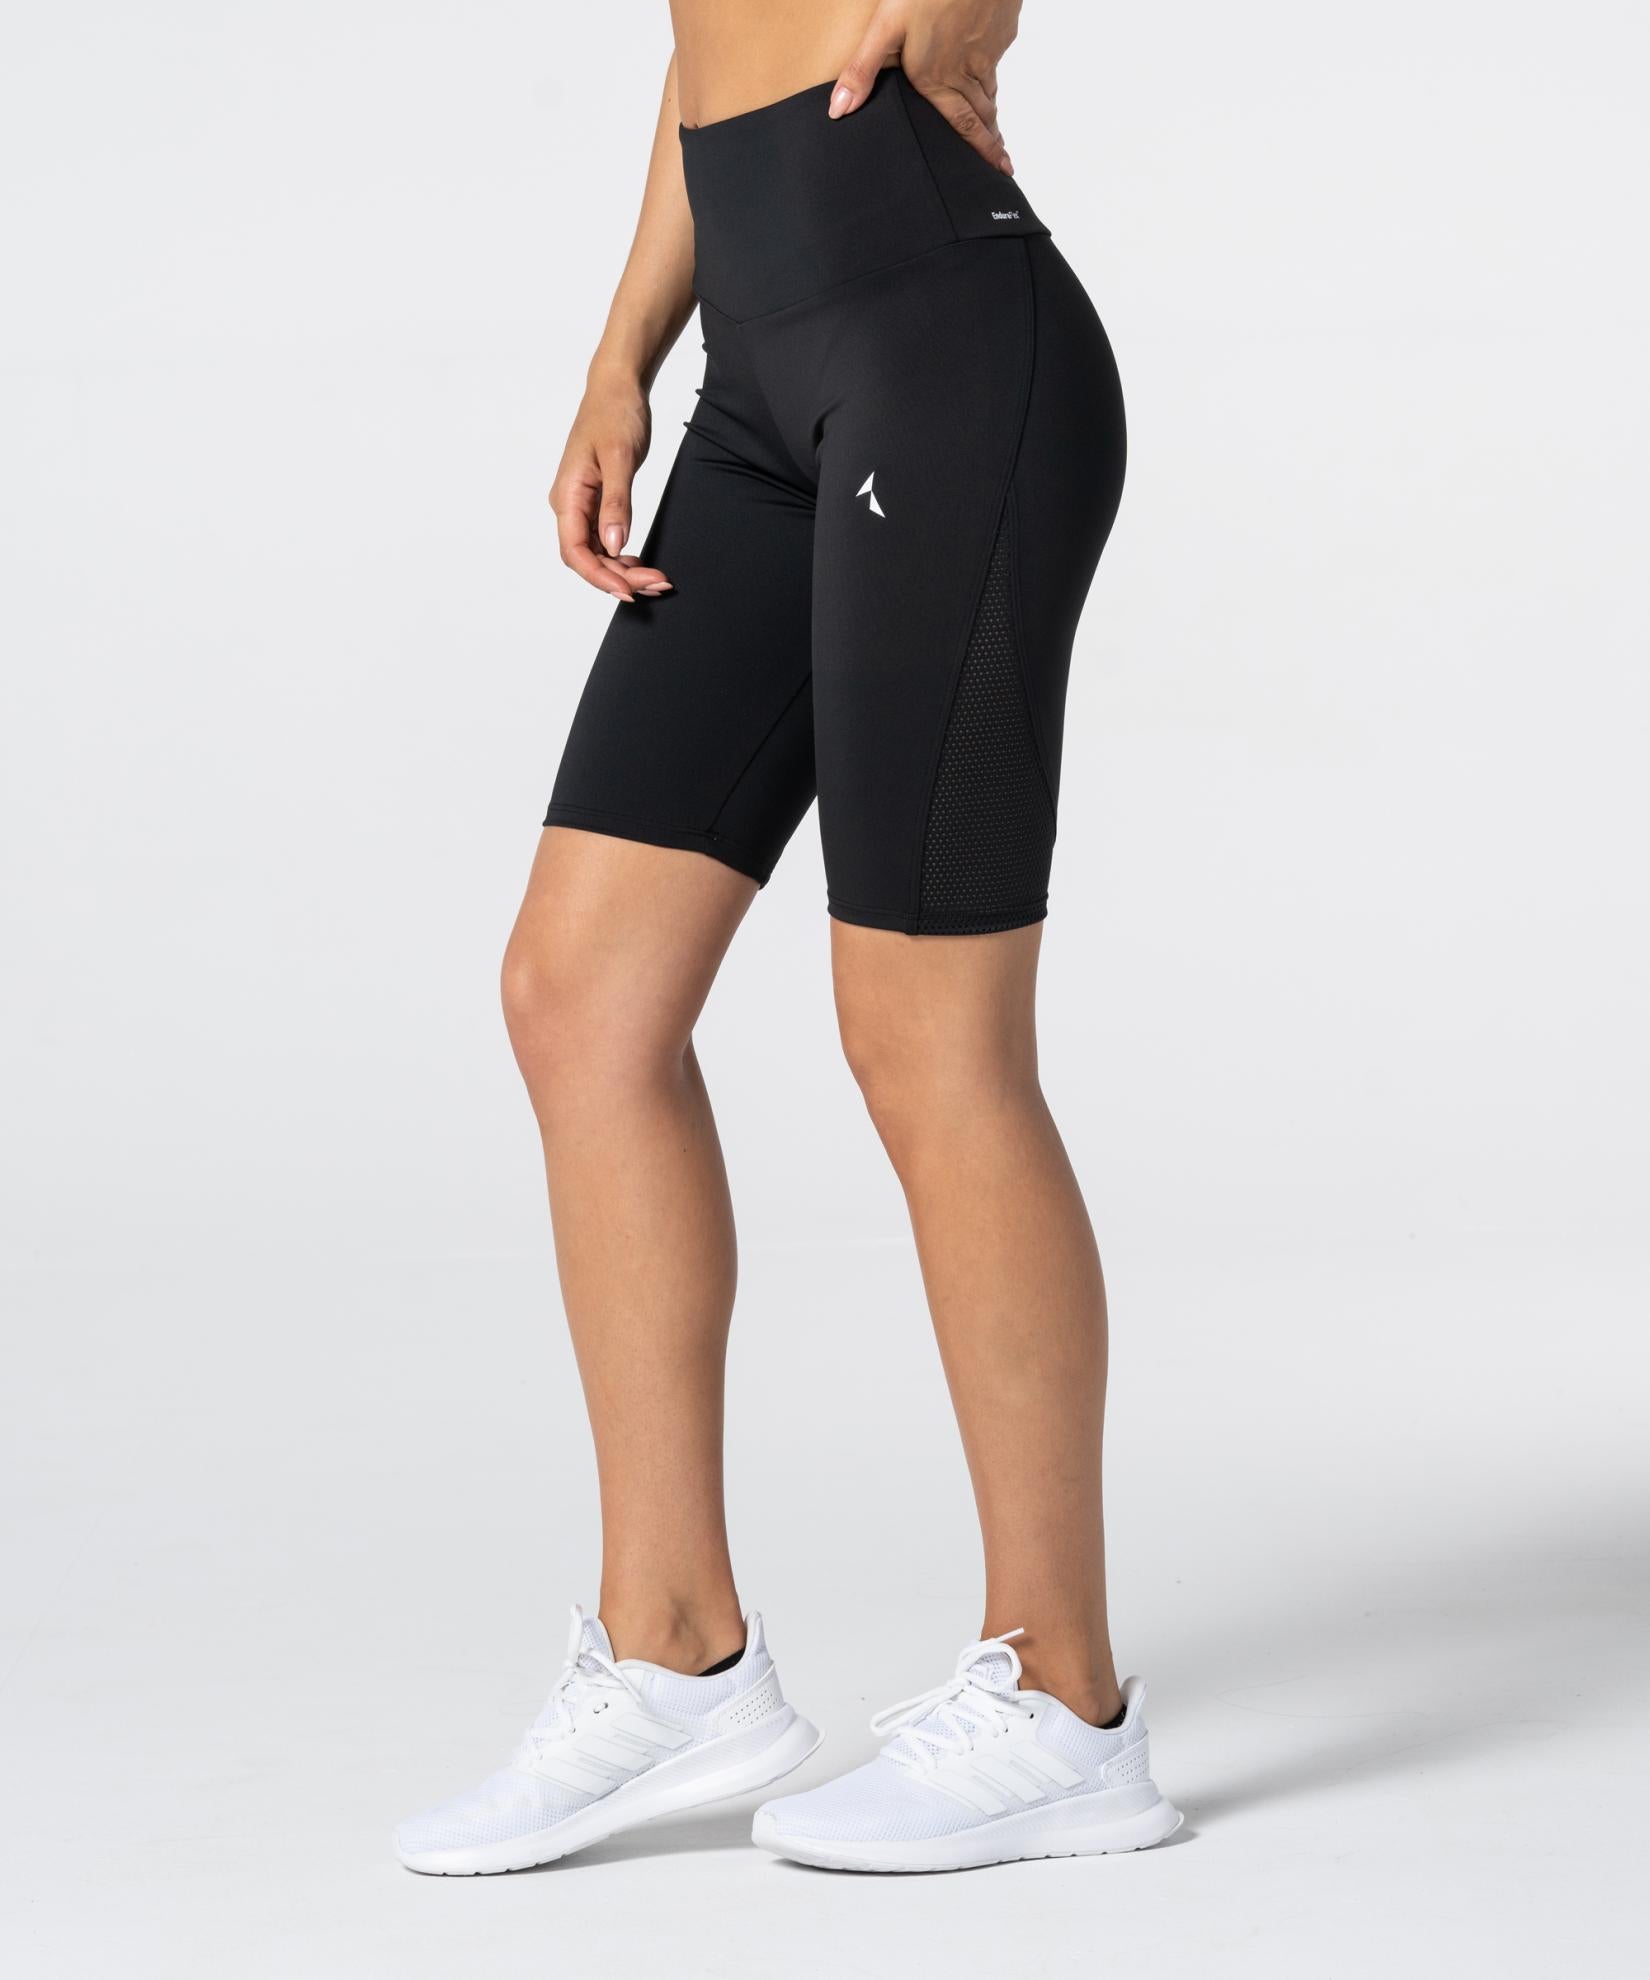 Carpatree Side Mesh Biker Shorts - Black high waisted bicycle shorts with a deep waist band and side mesh panelling. Made of strong stretch fabric composed of quick-drying and breathable polyester.